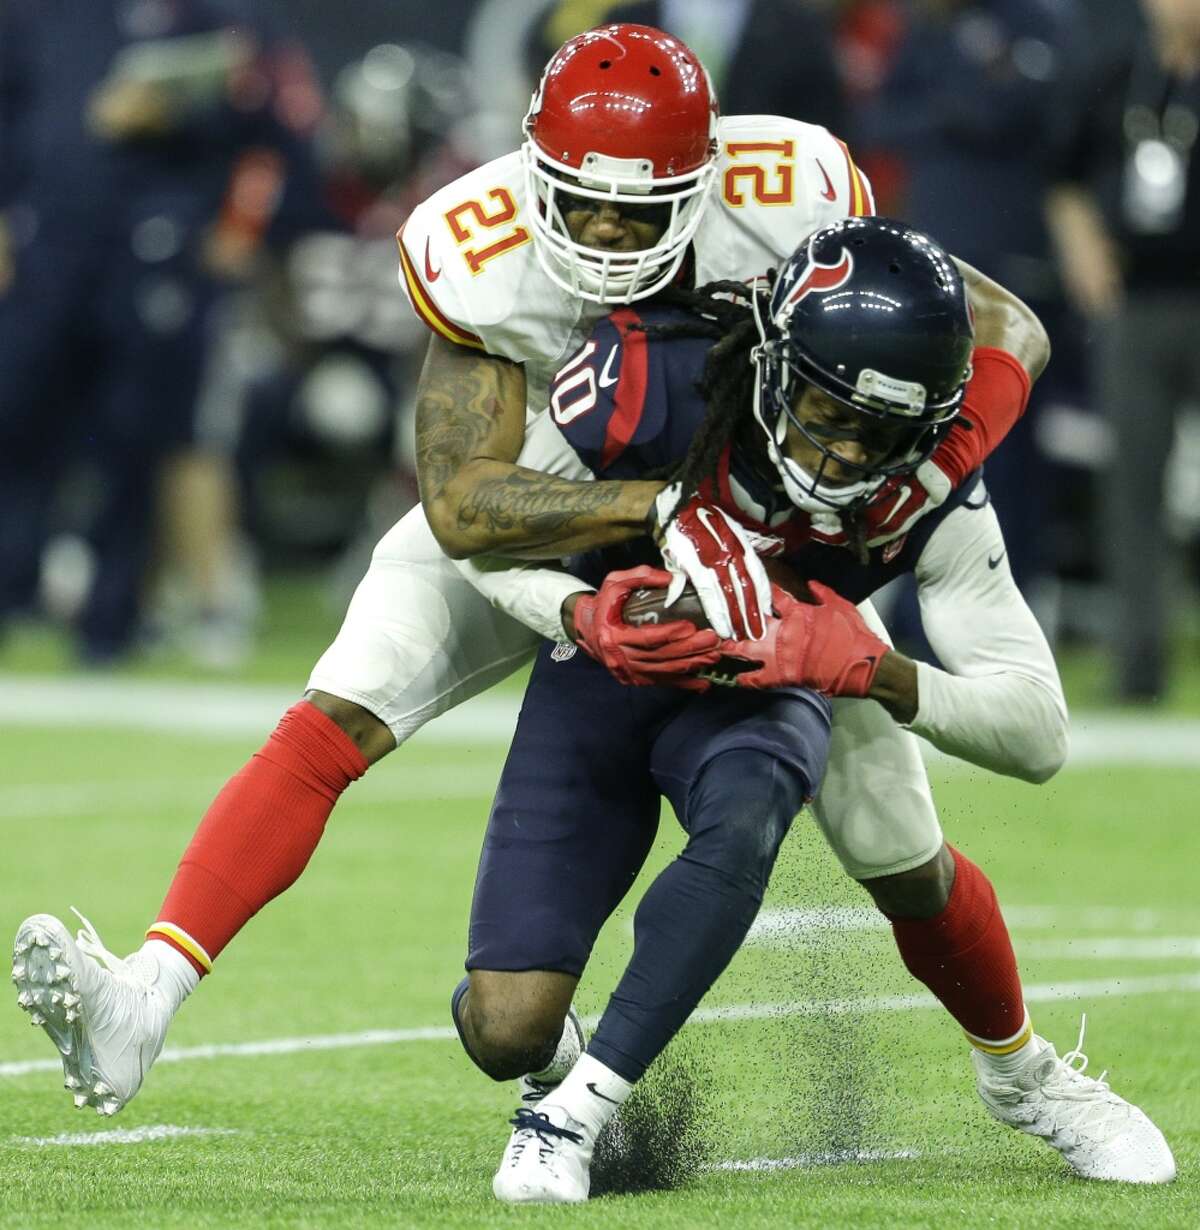 The Chiefs embarrassed the Texans in last year's playoffs and are back for a Week 2 matchup. Click through the gallery for John McClain's keys to the game and prediction.